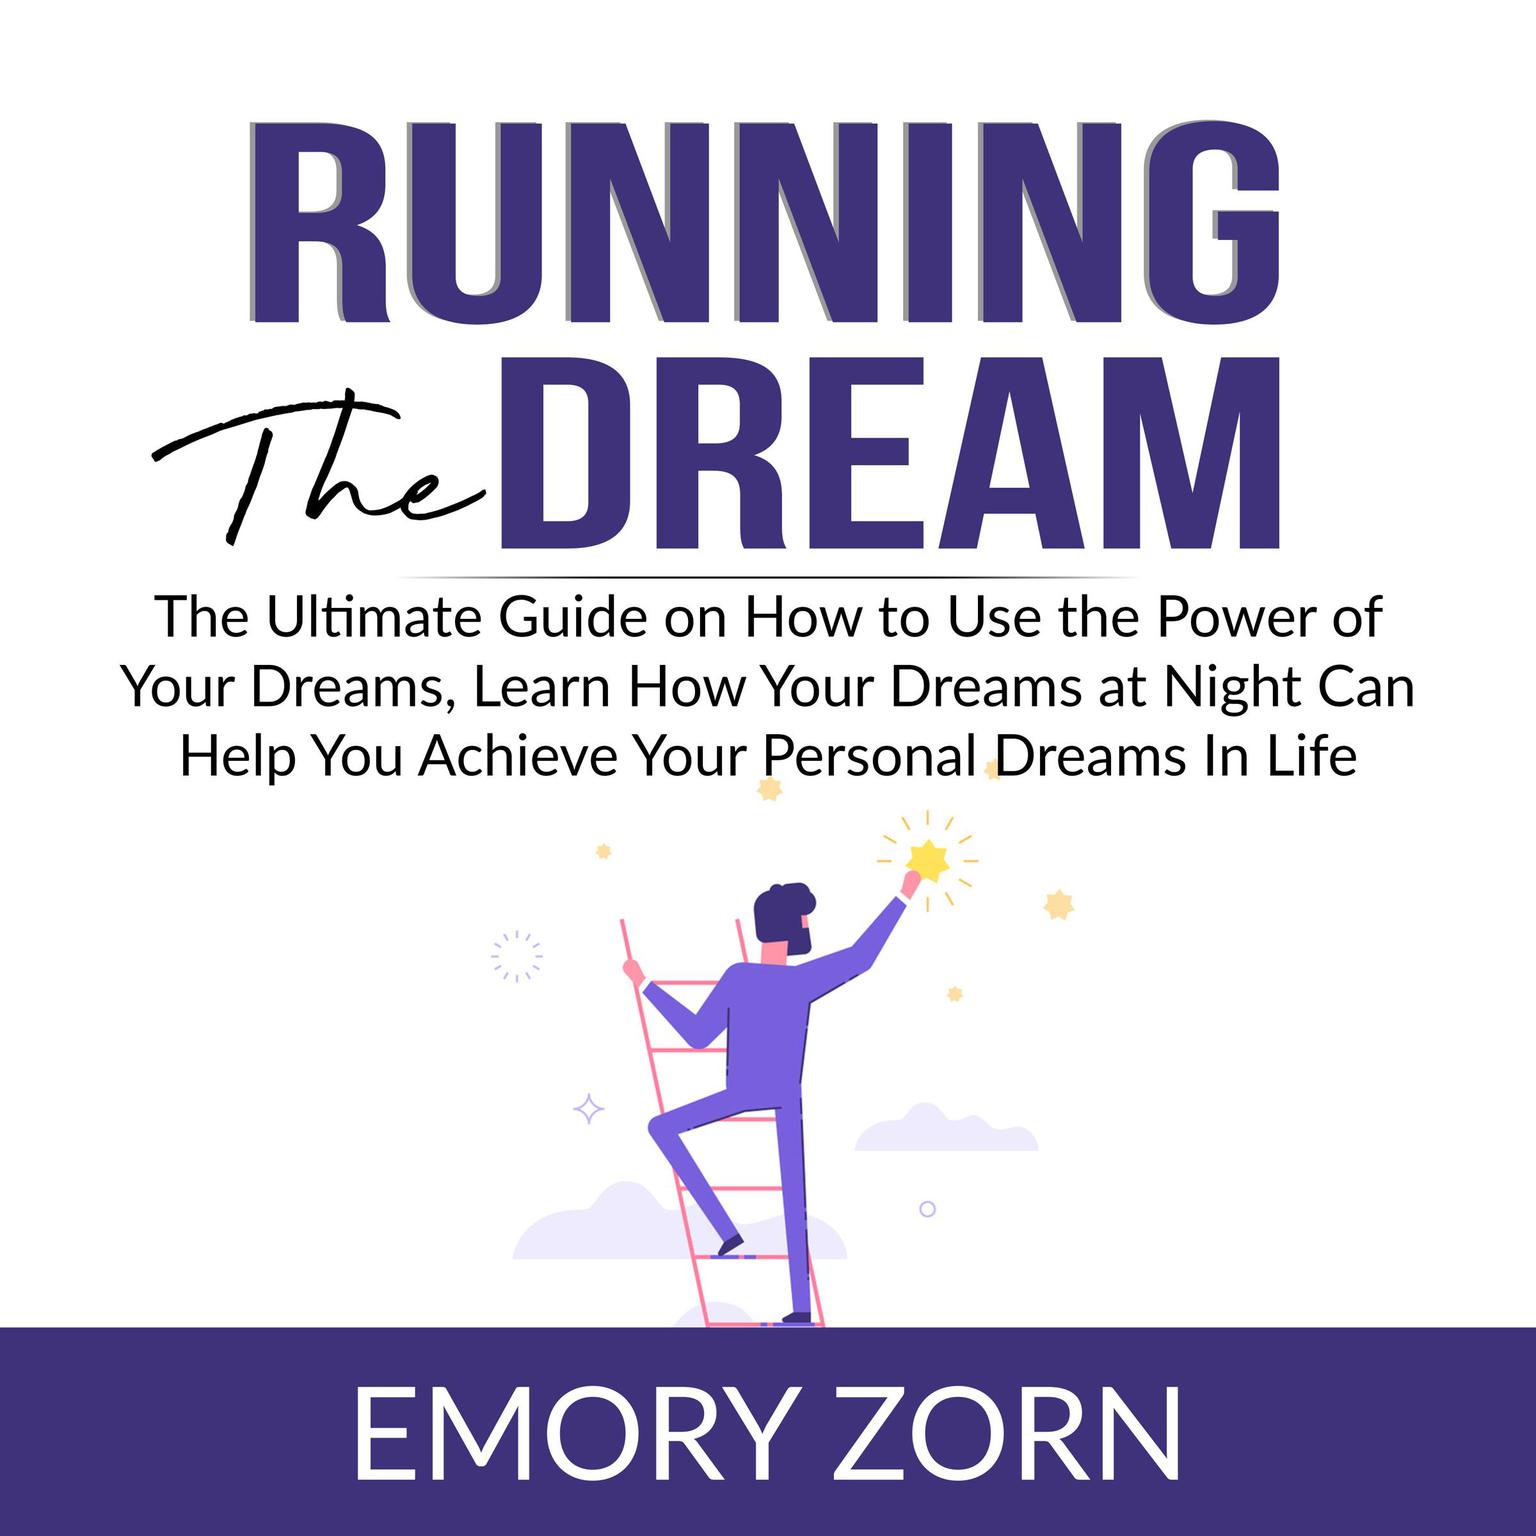 Running The Dream: The Ultimate Guide on How to Use the Power of Your Dreams, Learn How Your Dreams at Night Can Help You Achieve Your Personal Dreams In Life Audiobook, by Emory Zorn